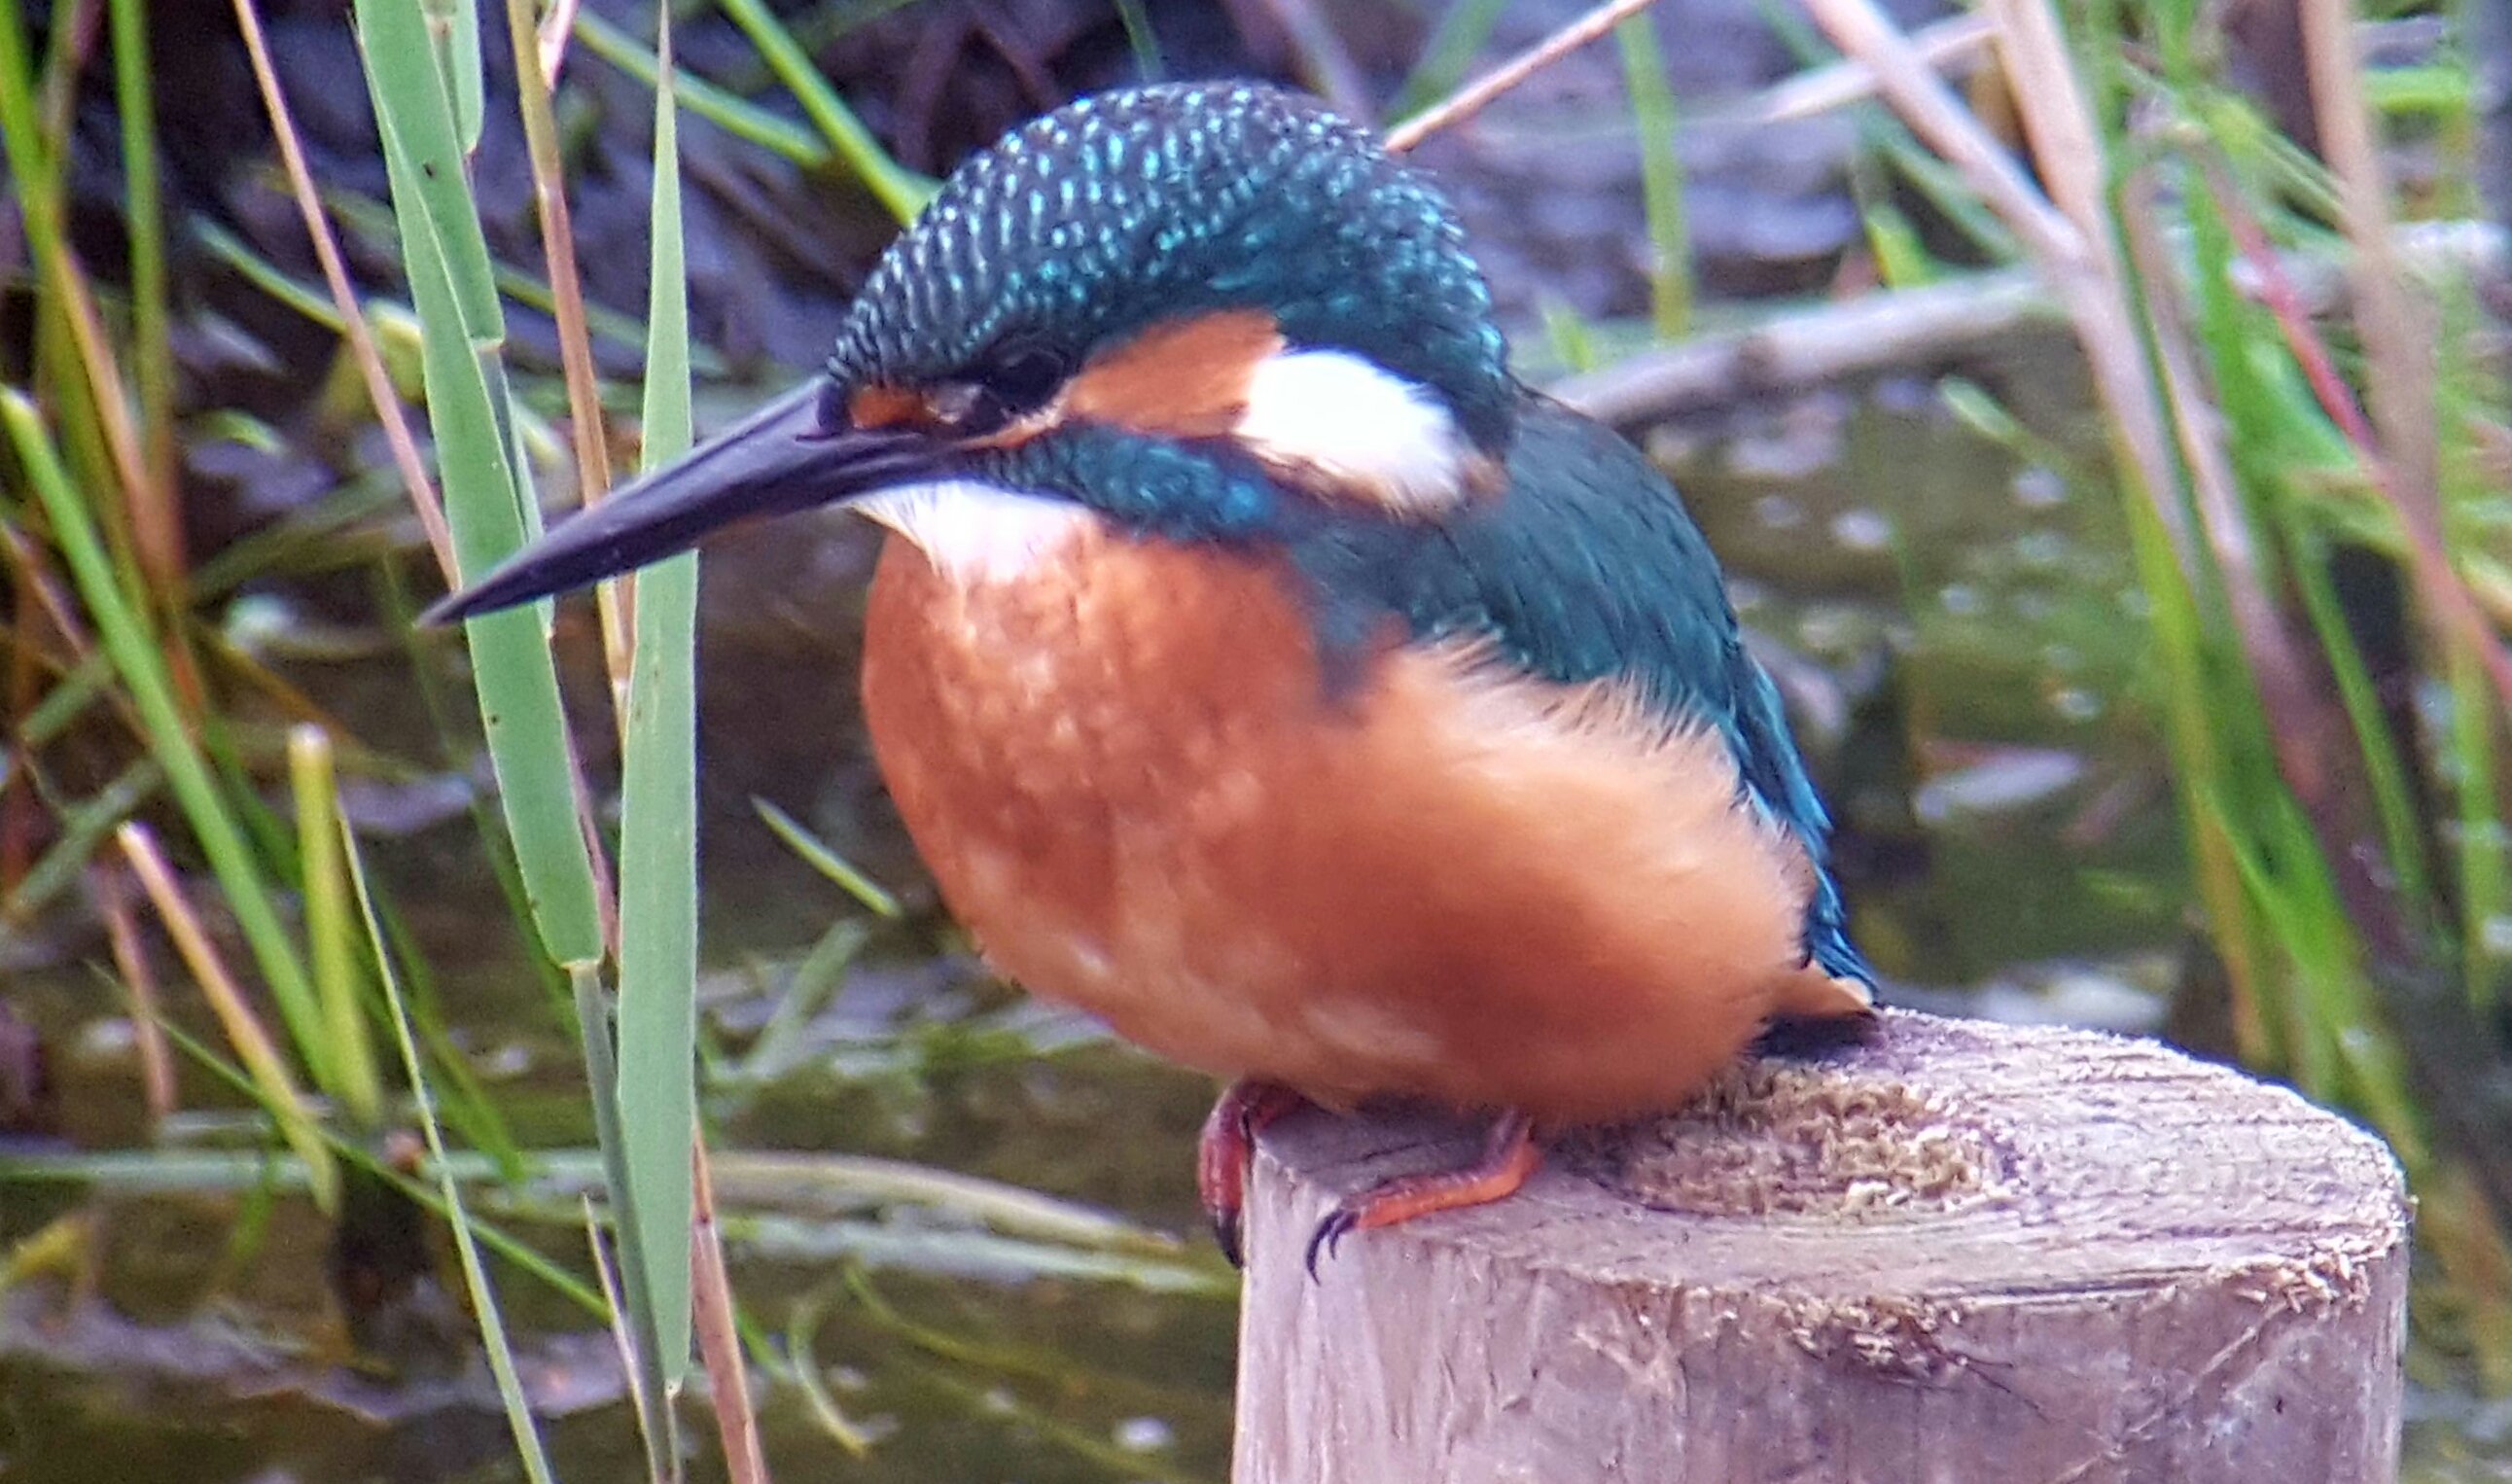 Kingfisher (taken with mobile phone and telescope)